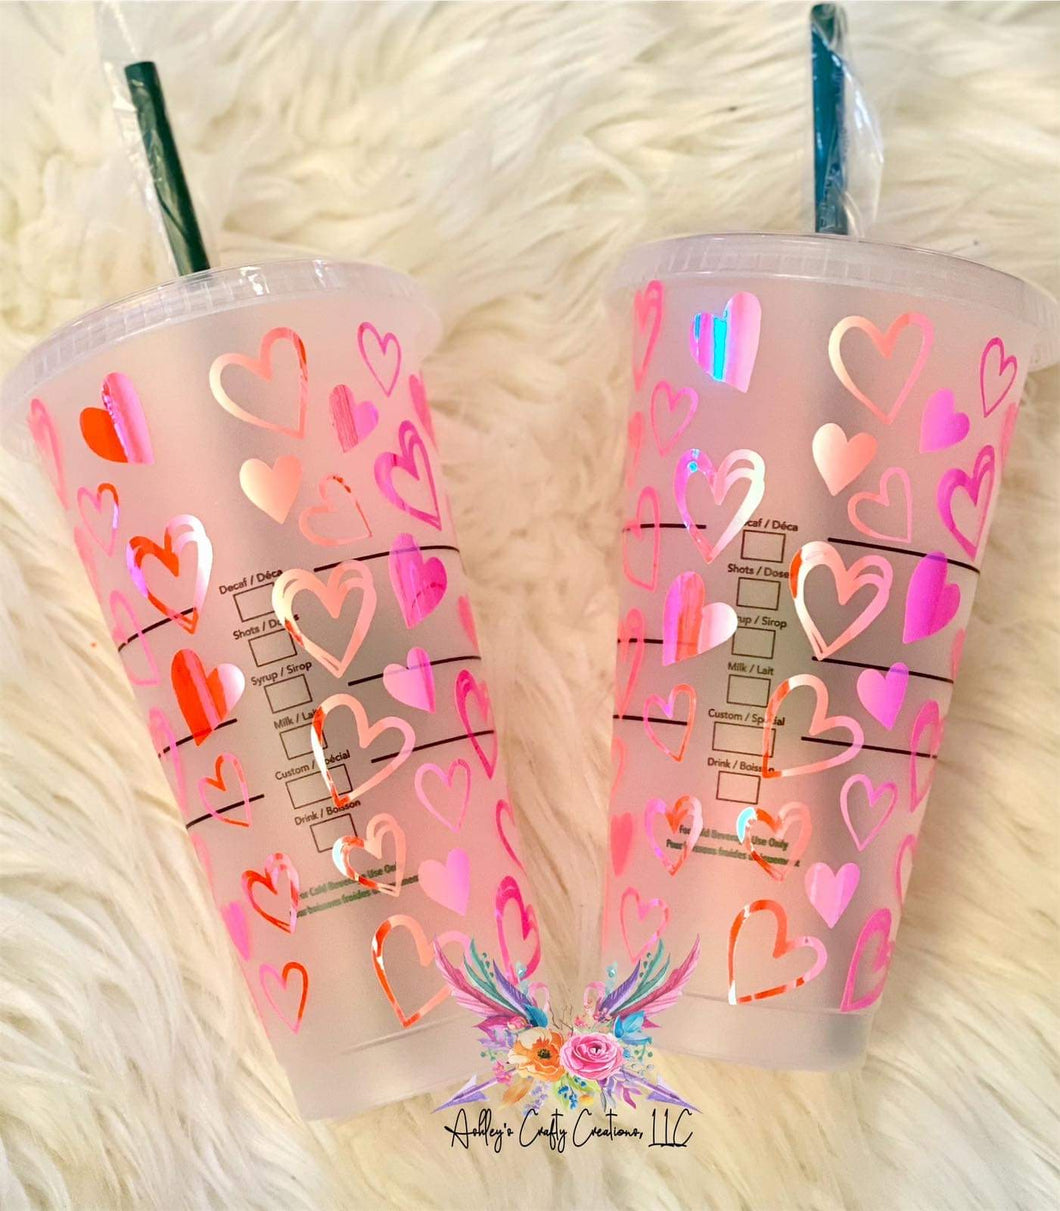 Valentines Day Cups